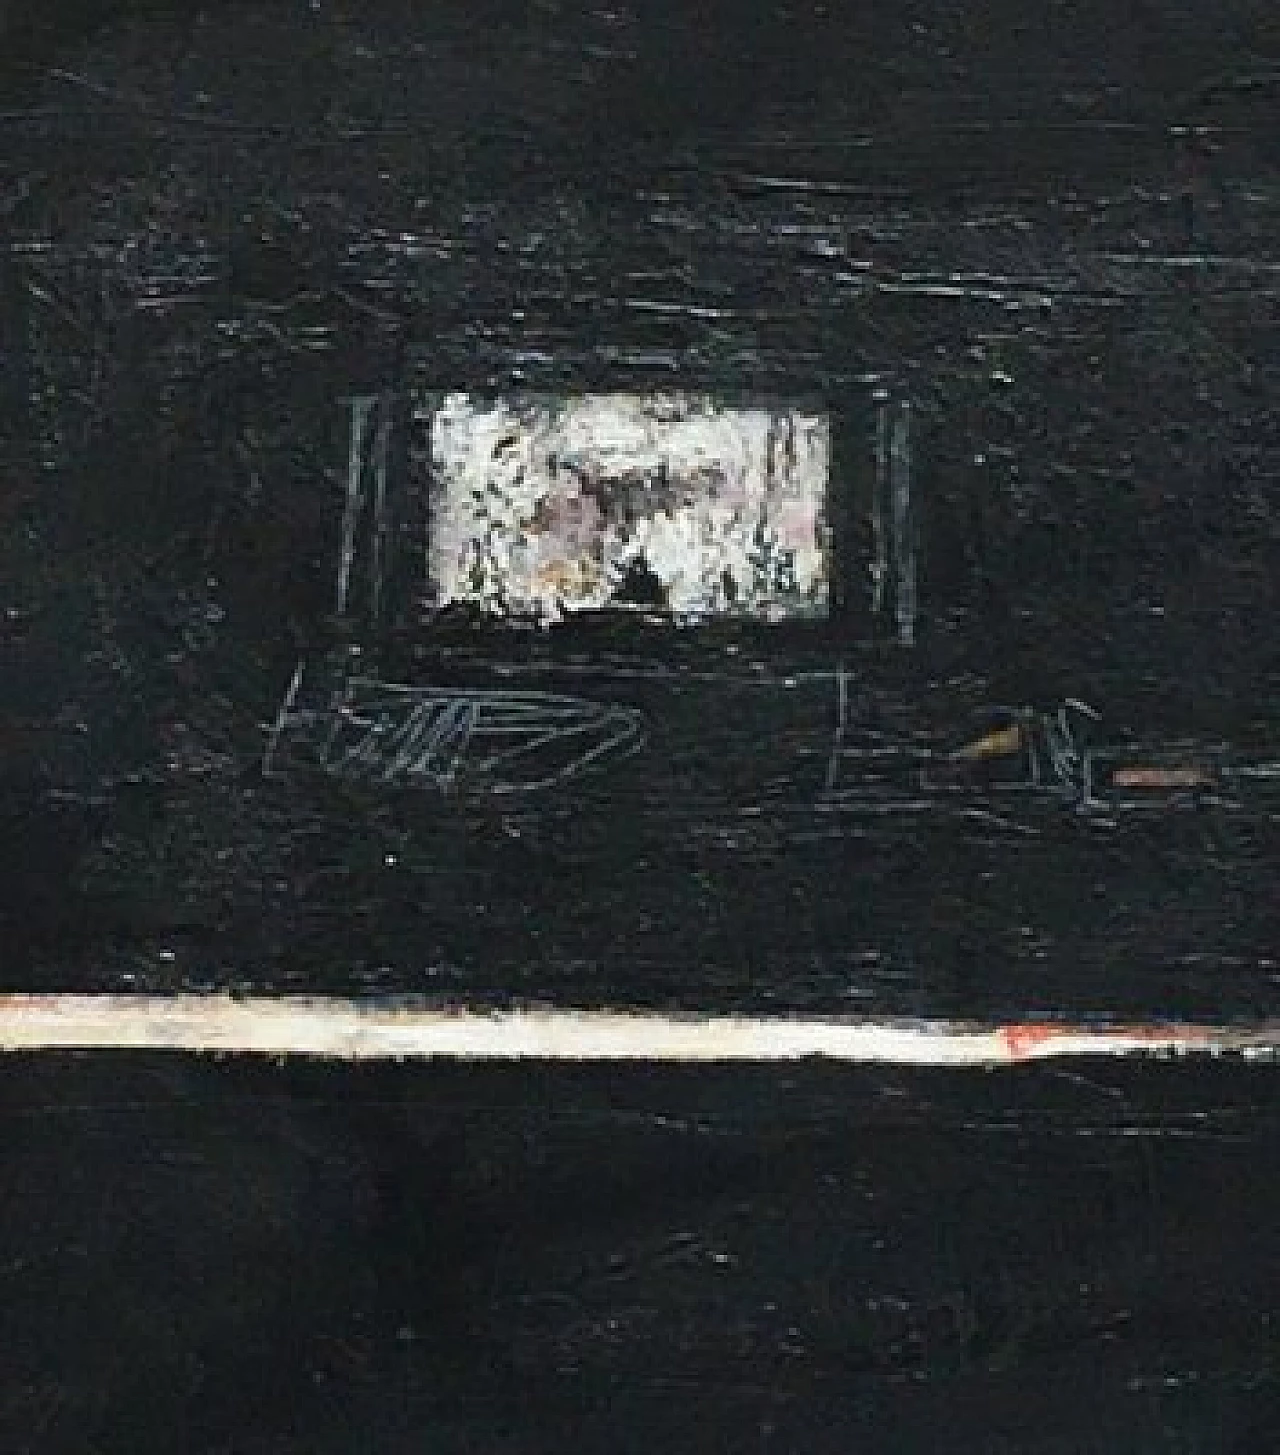 Massimo D'Orta, The Journey, mixed media painting on canvas, 2011 4